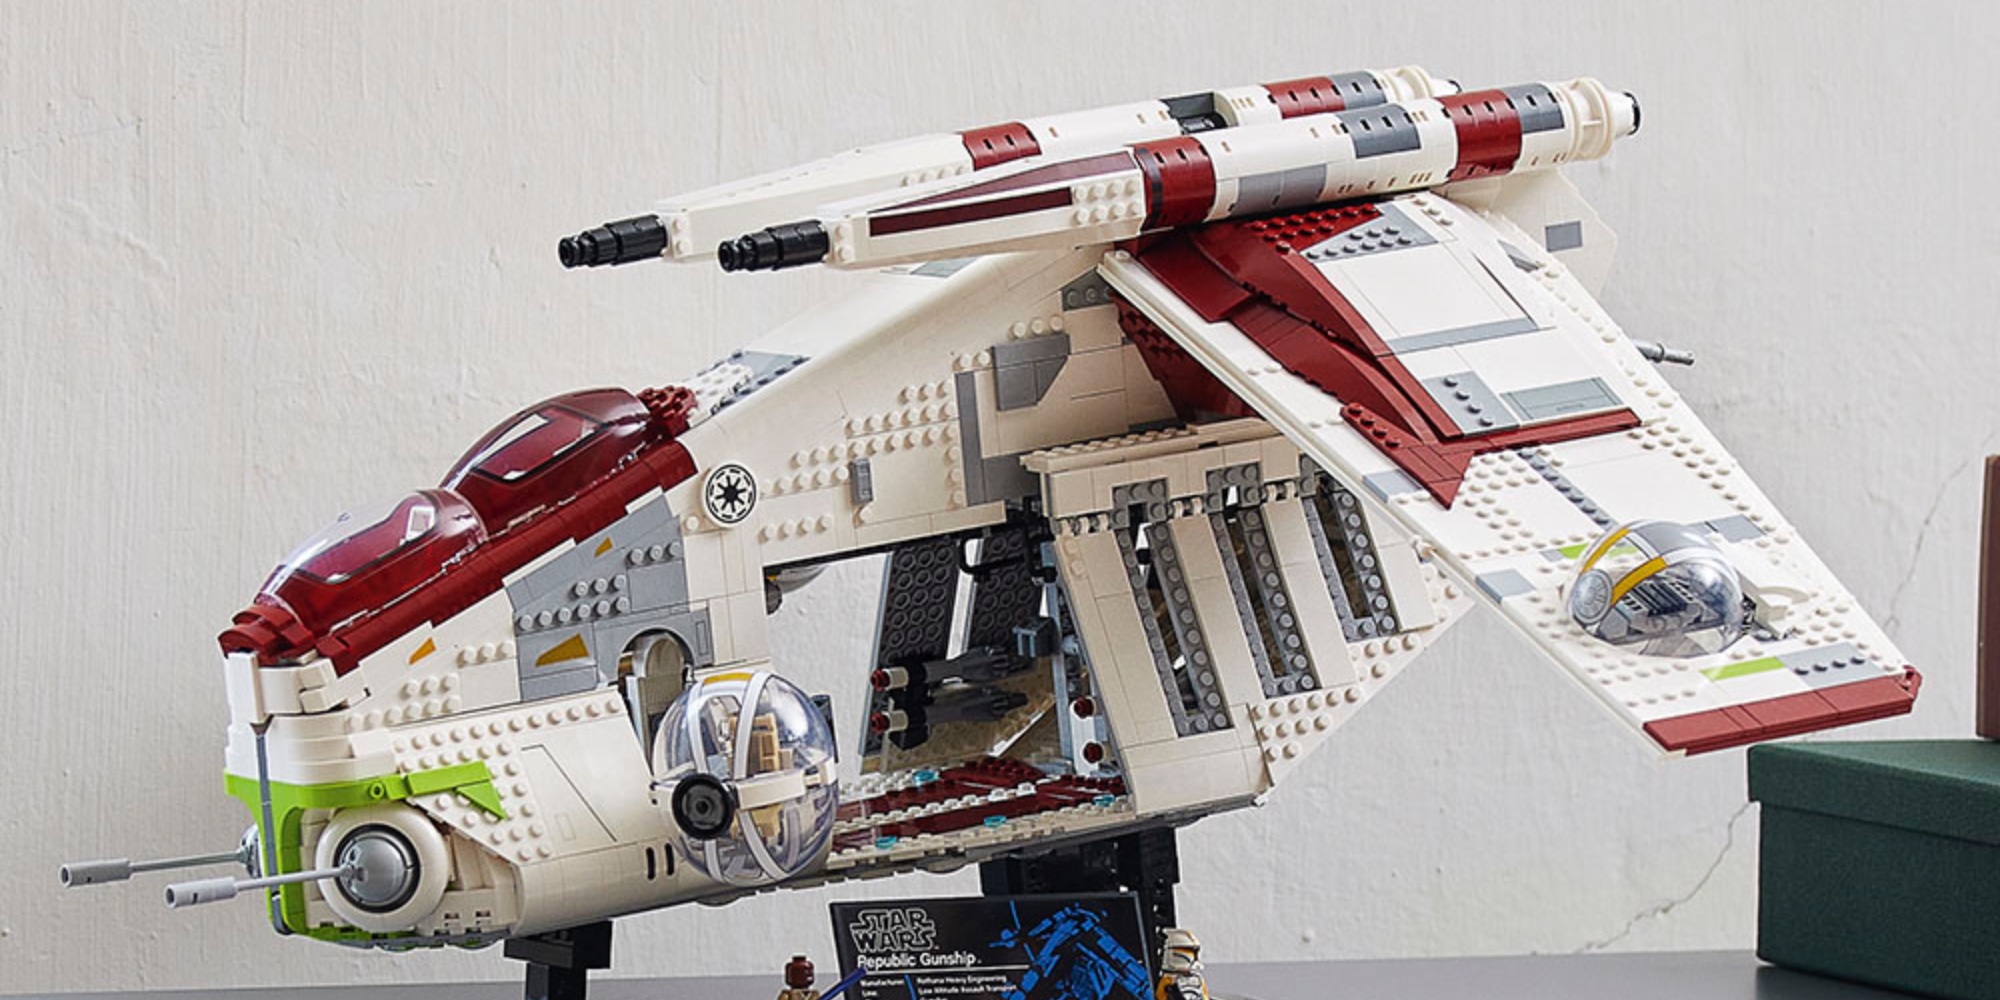 LEGO UCS Republic Gunship debuts with nearly 3,300 pieces 9to5Toys